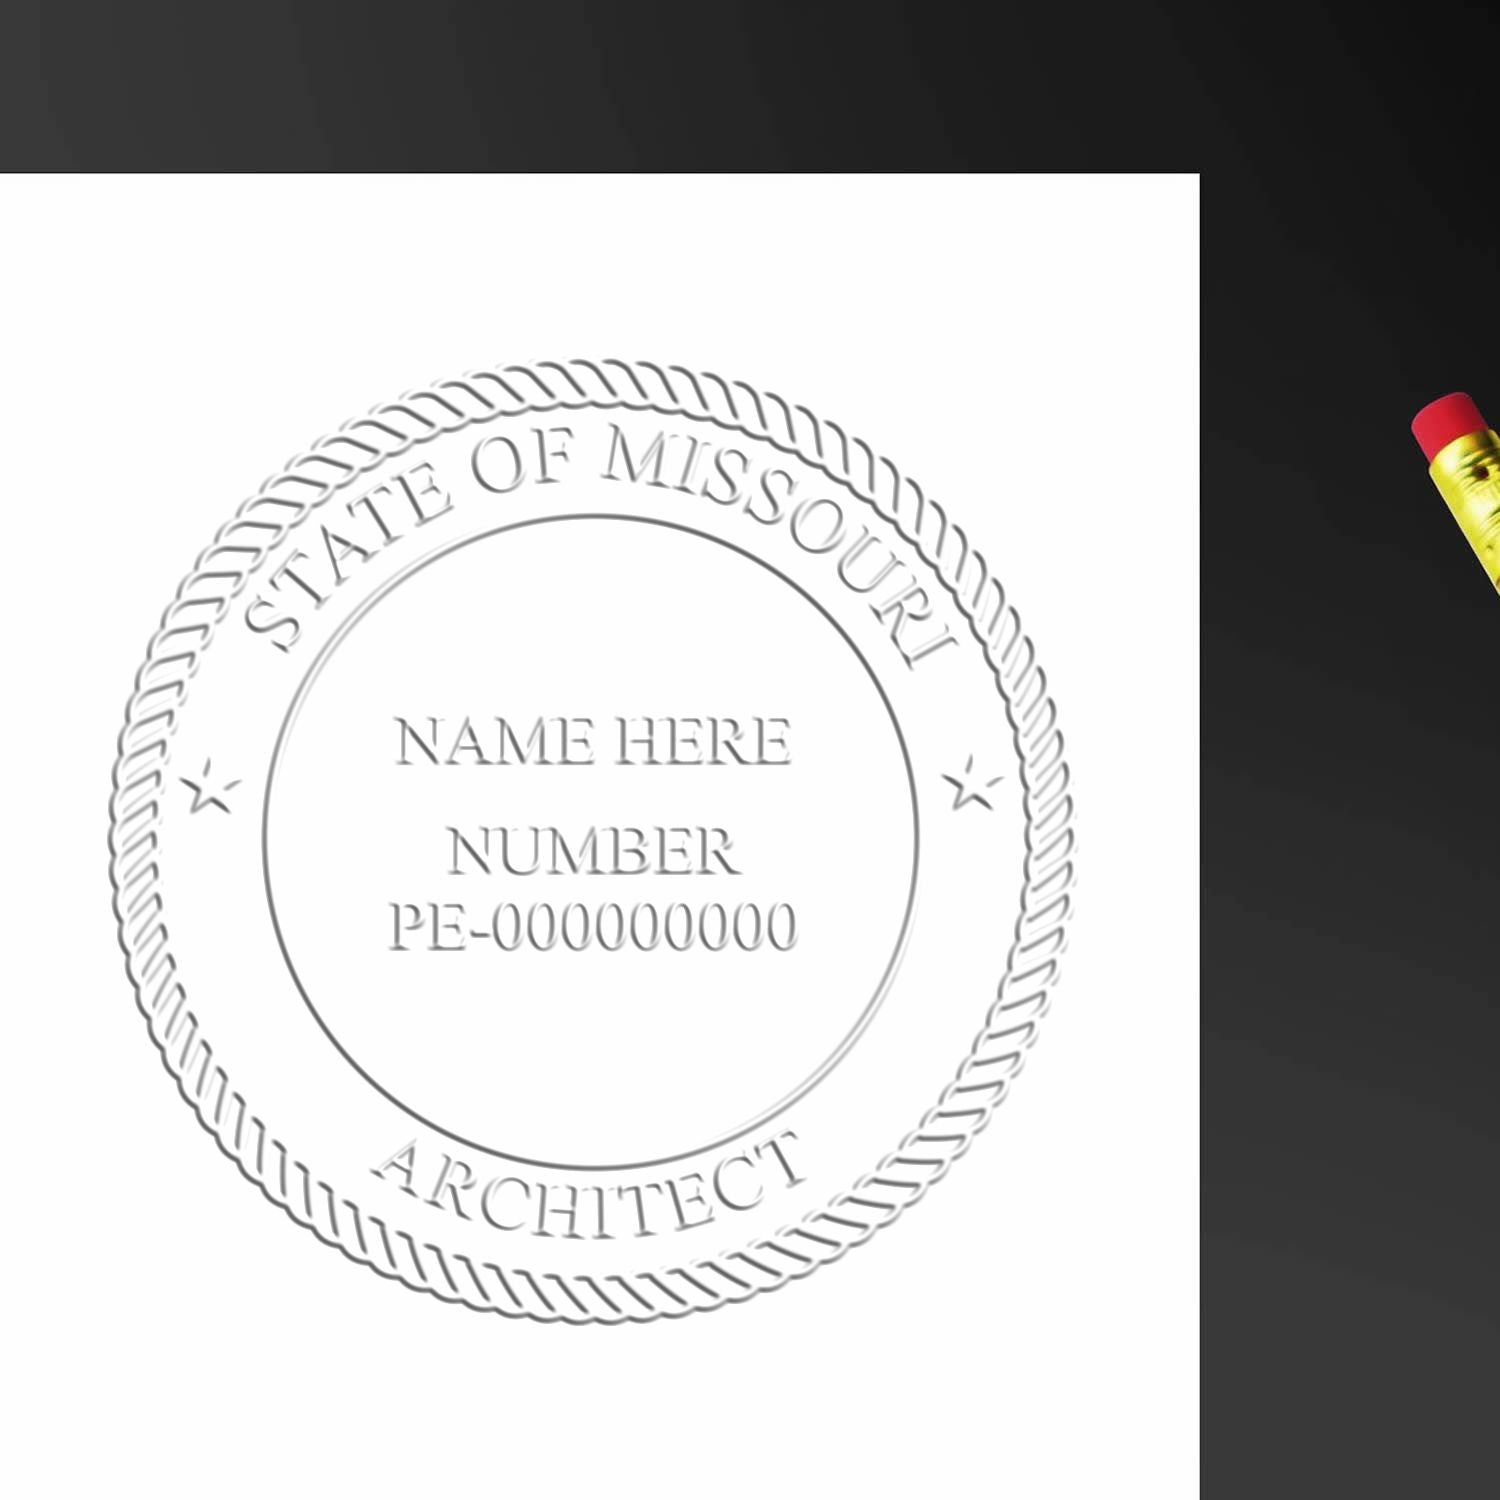 The main image for the Missouri Desk Architect Embossing Seal depicting a sample of the imprint and electronic files